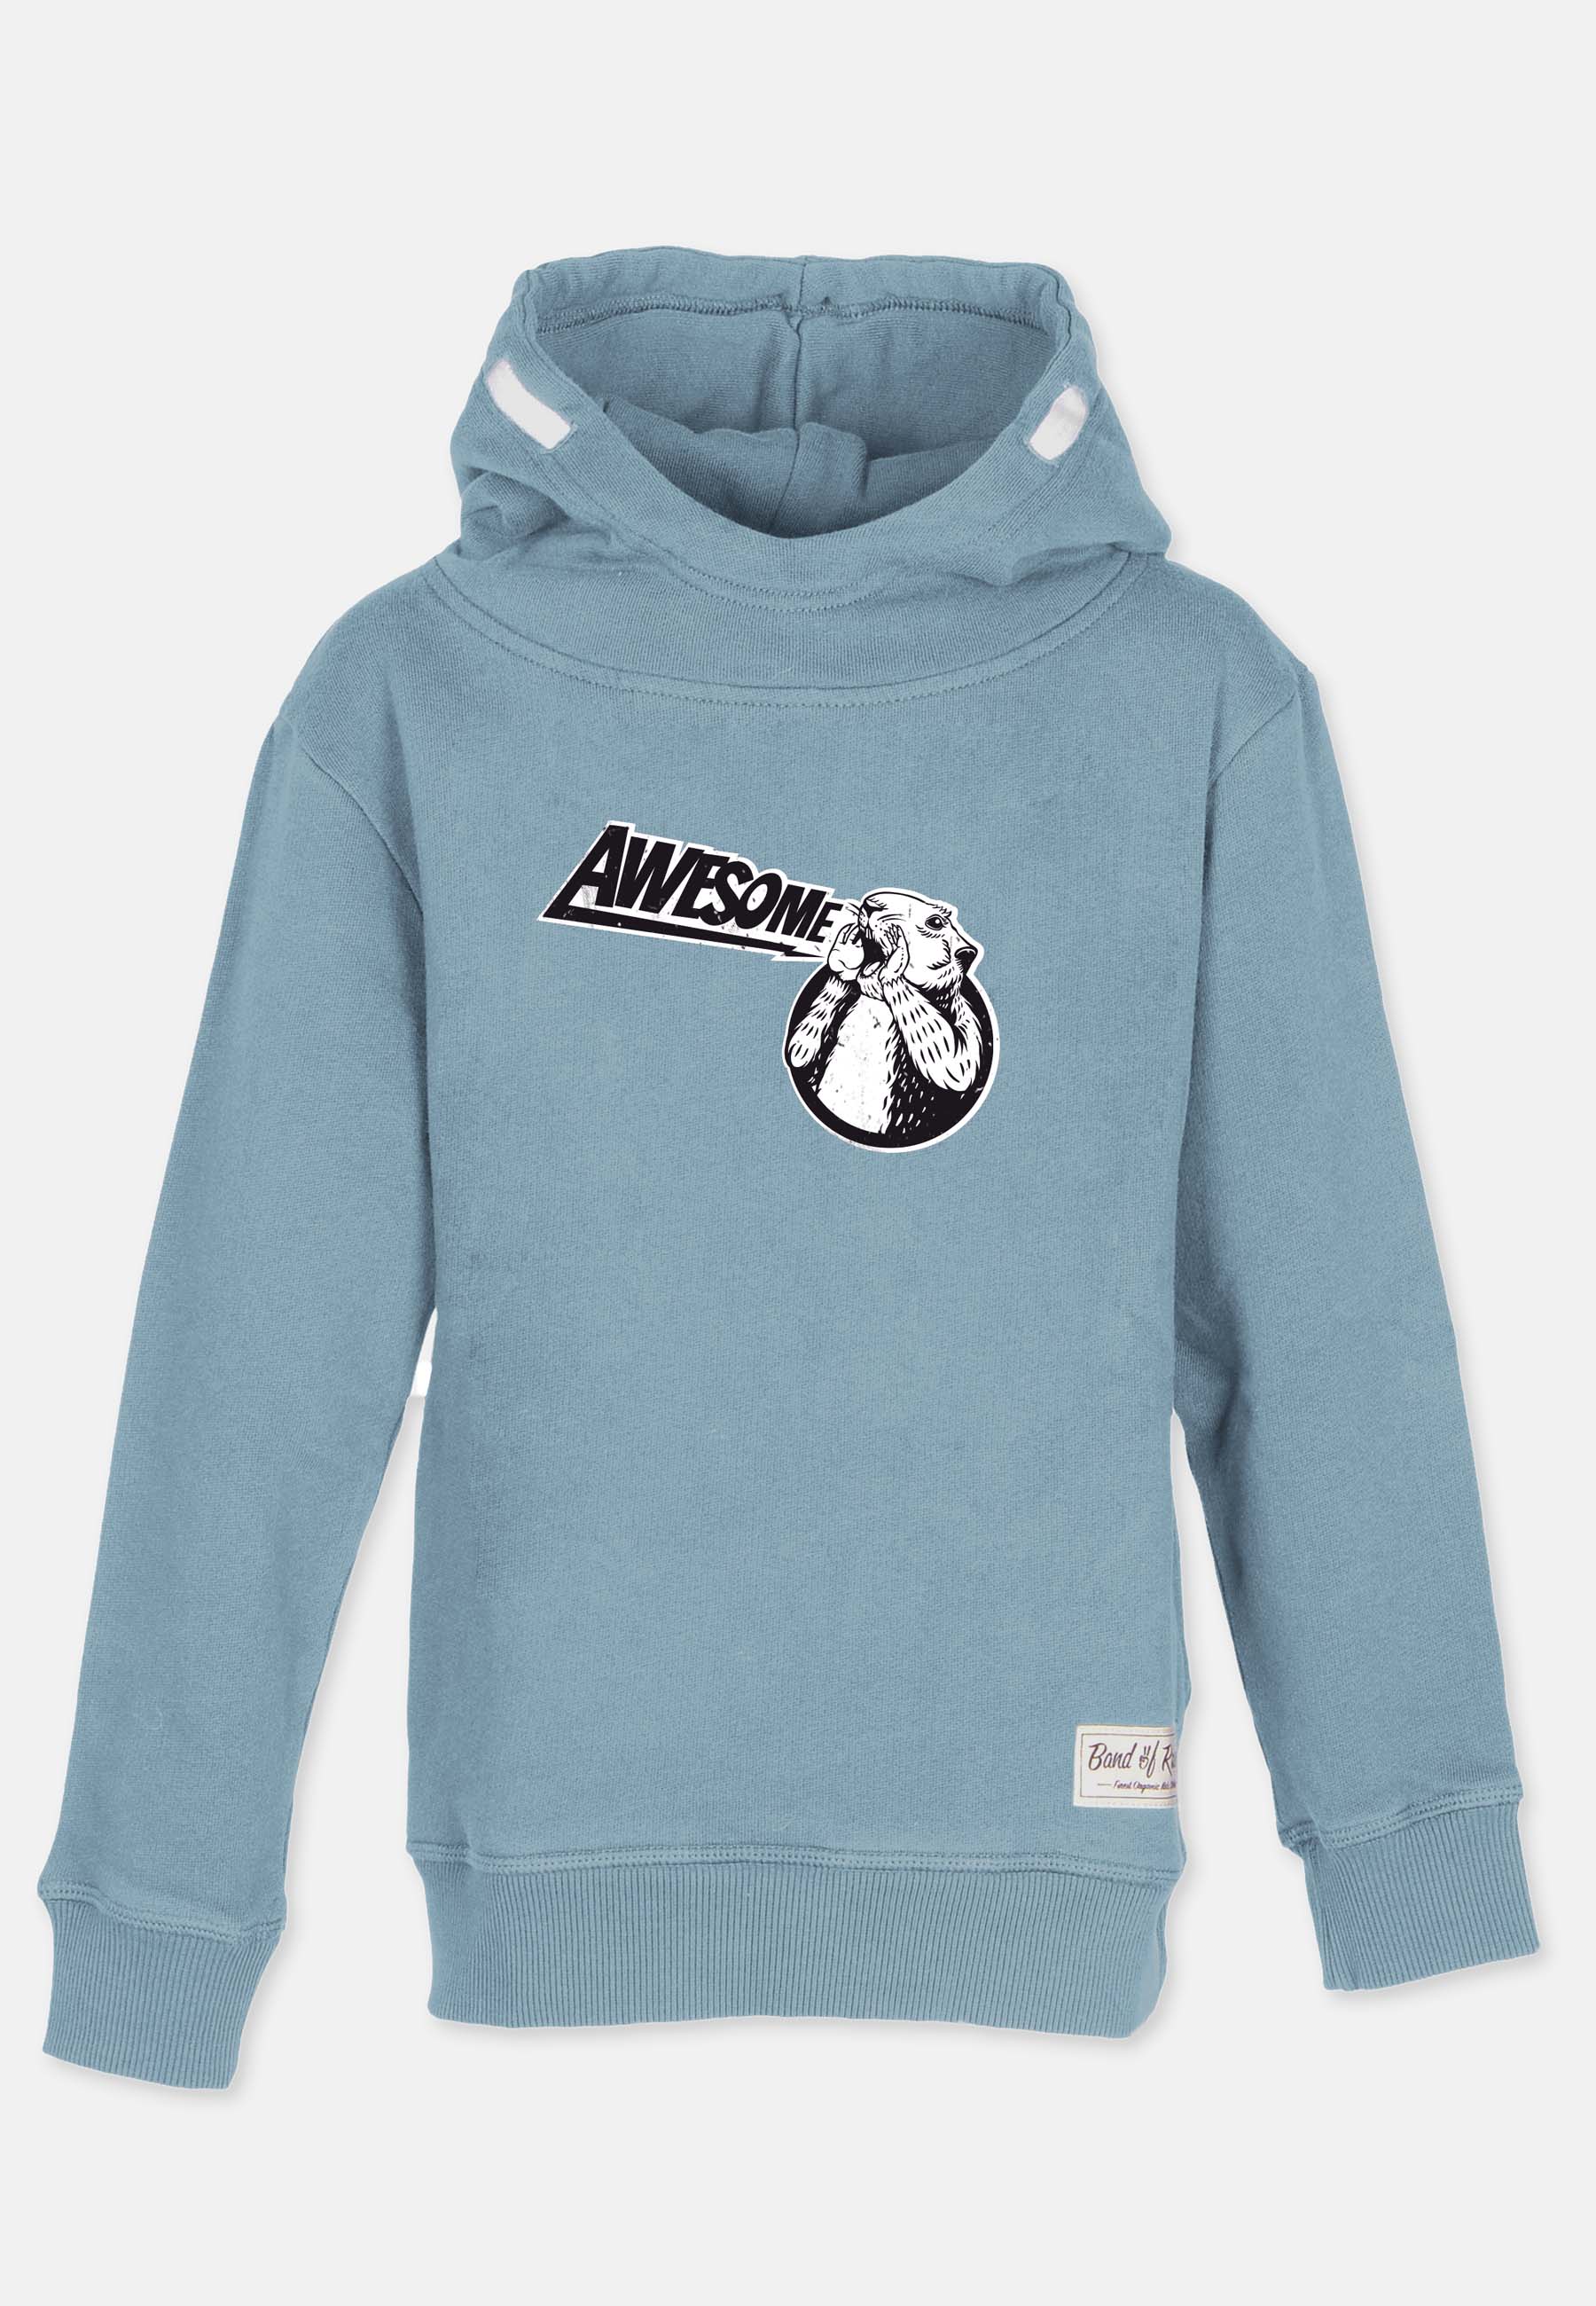 Awesome Hooded